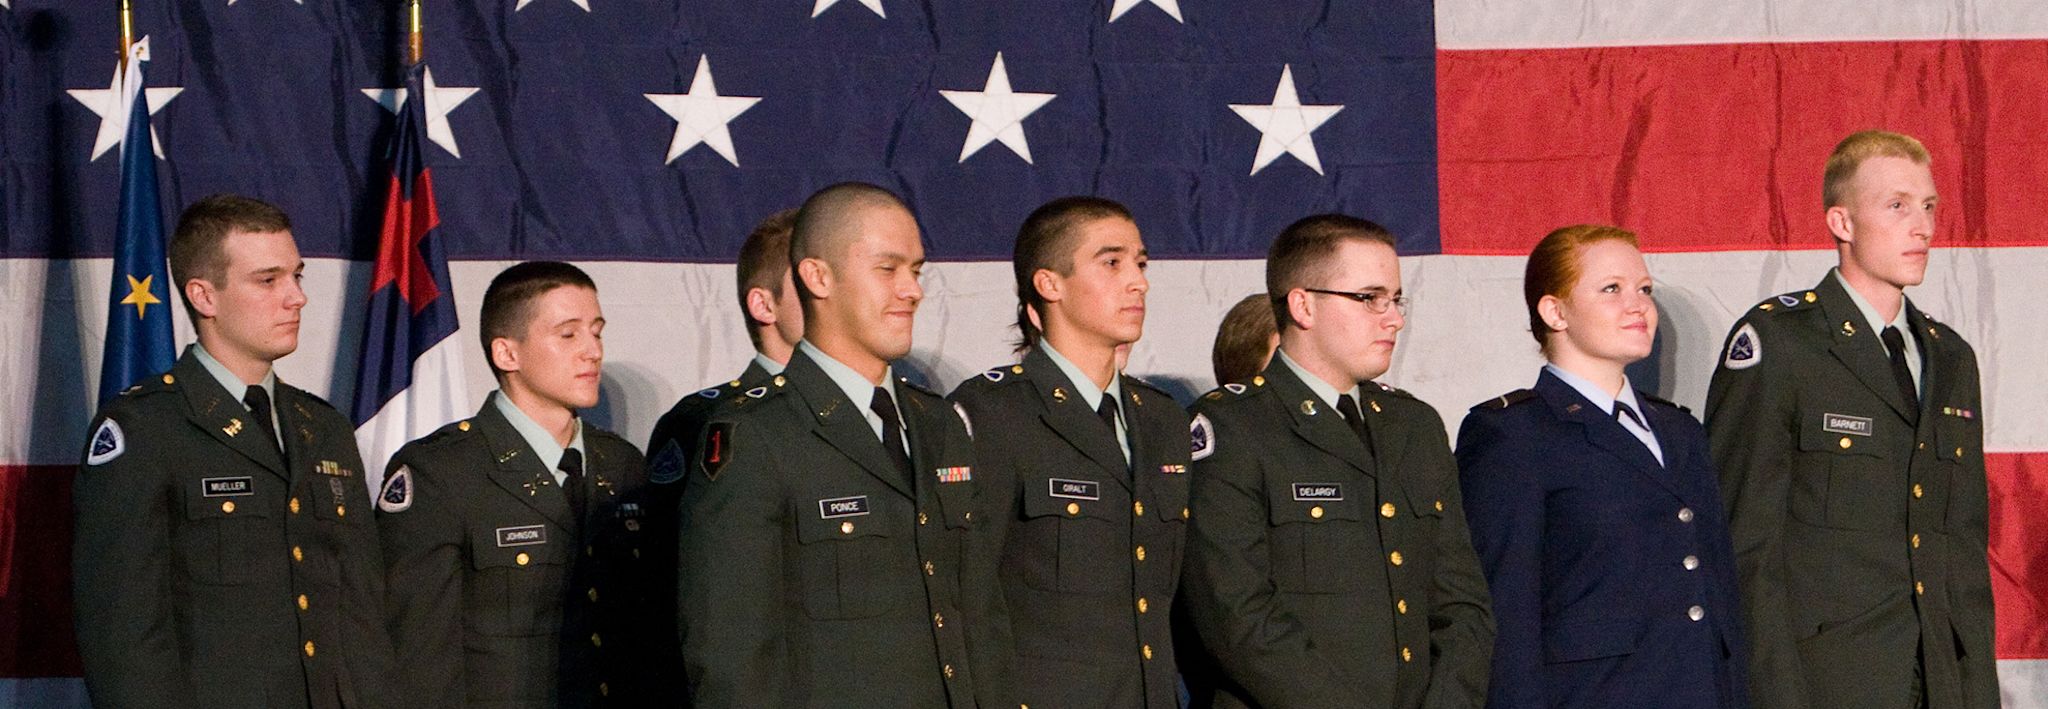 Colorado Christian University students involved in ROTC pose for a photo in front of an American flag.